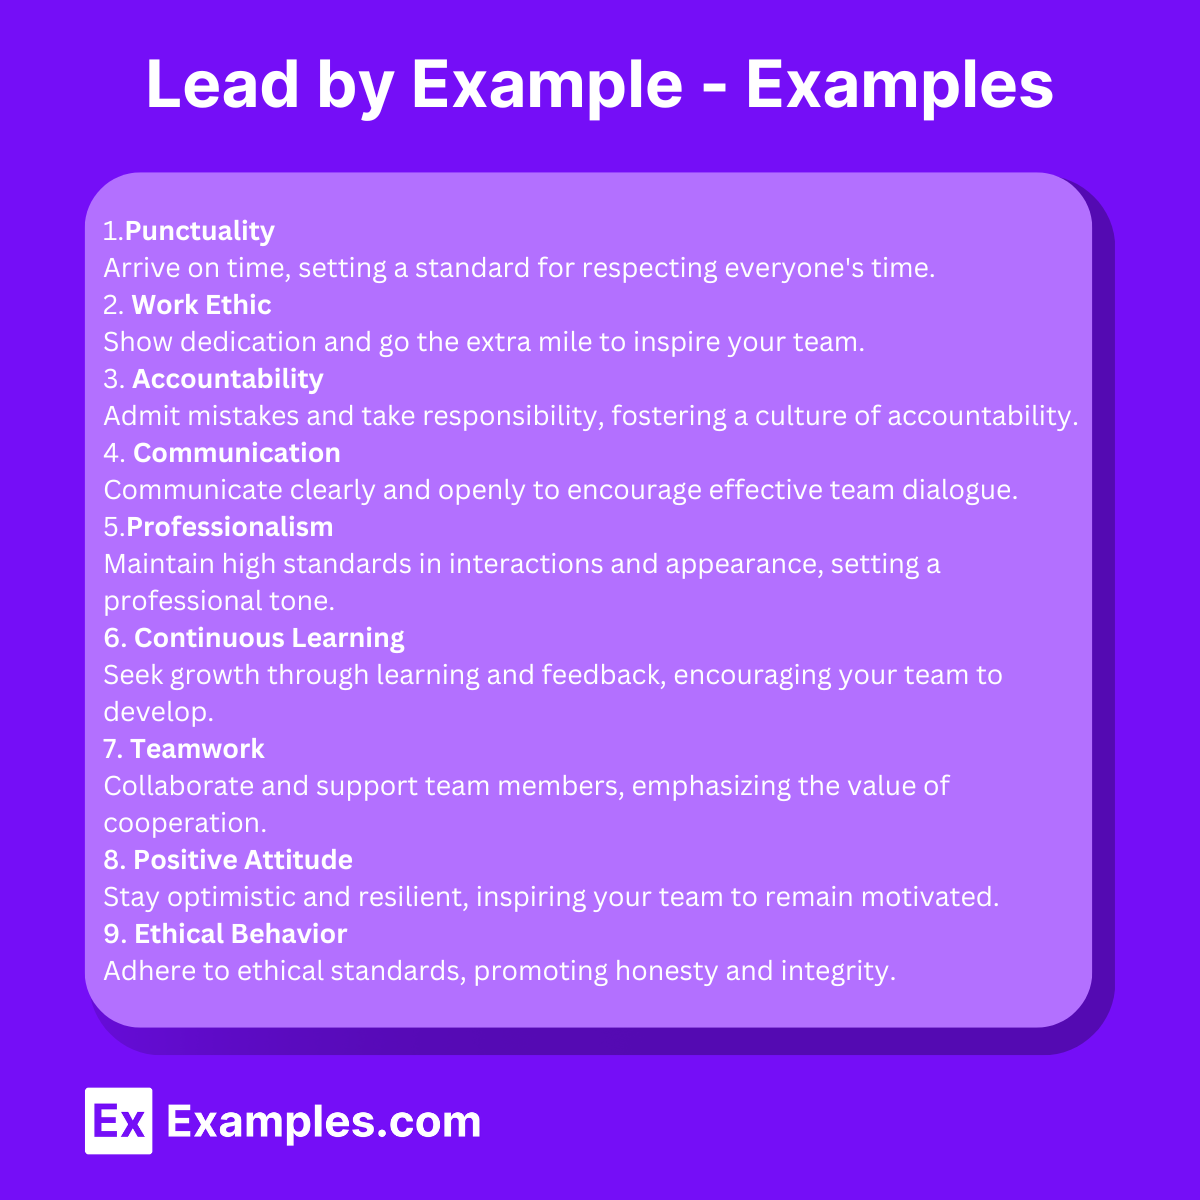 Lead by Example - Examples